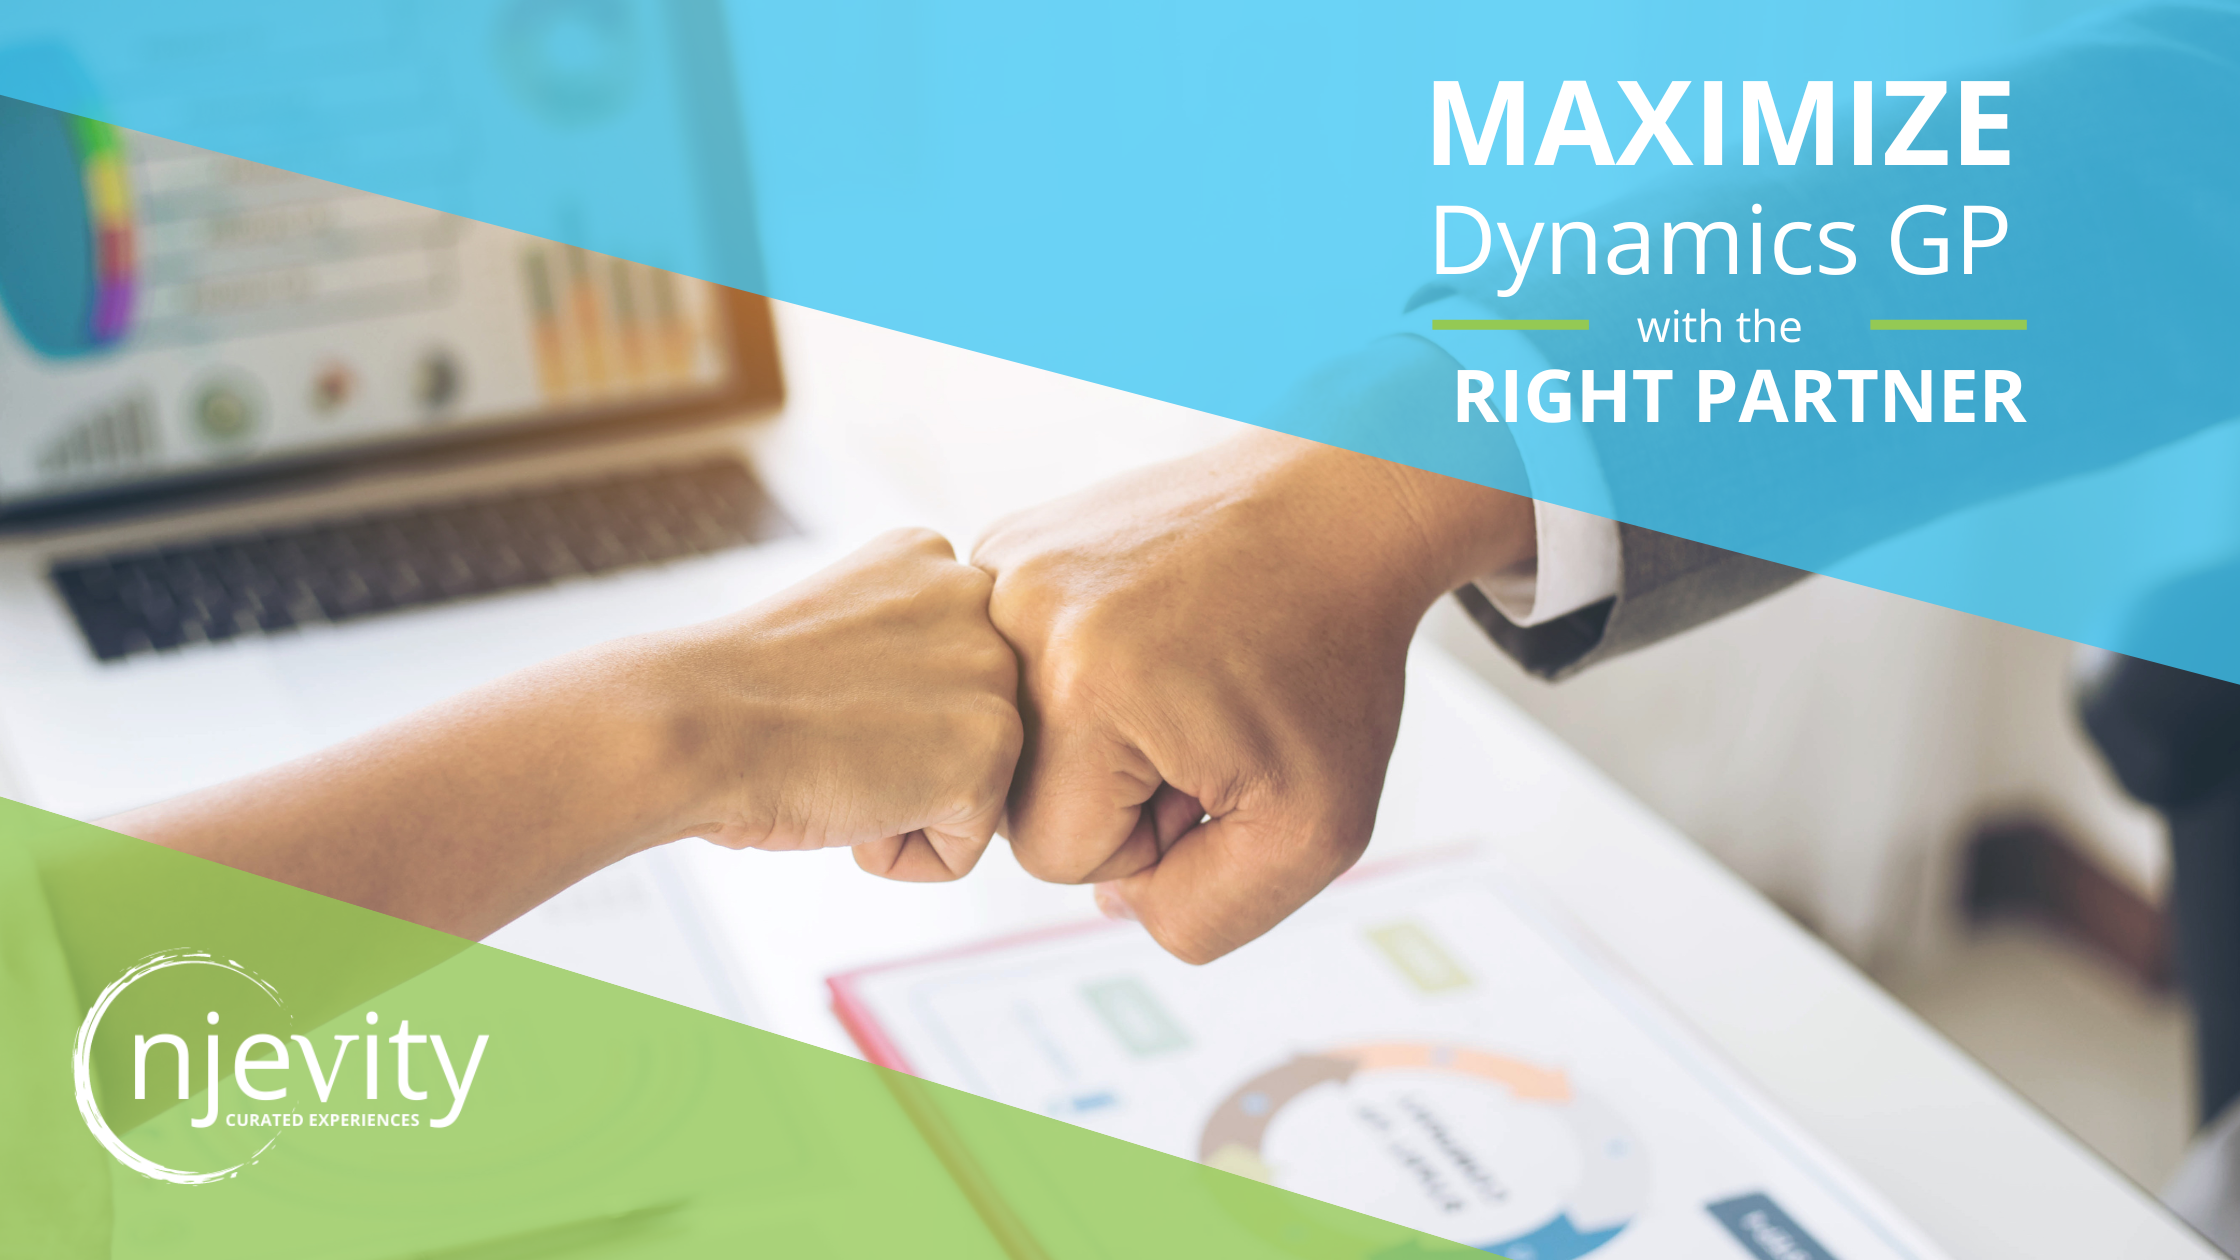 Maximize Dynamics GP with the Right Partner